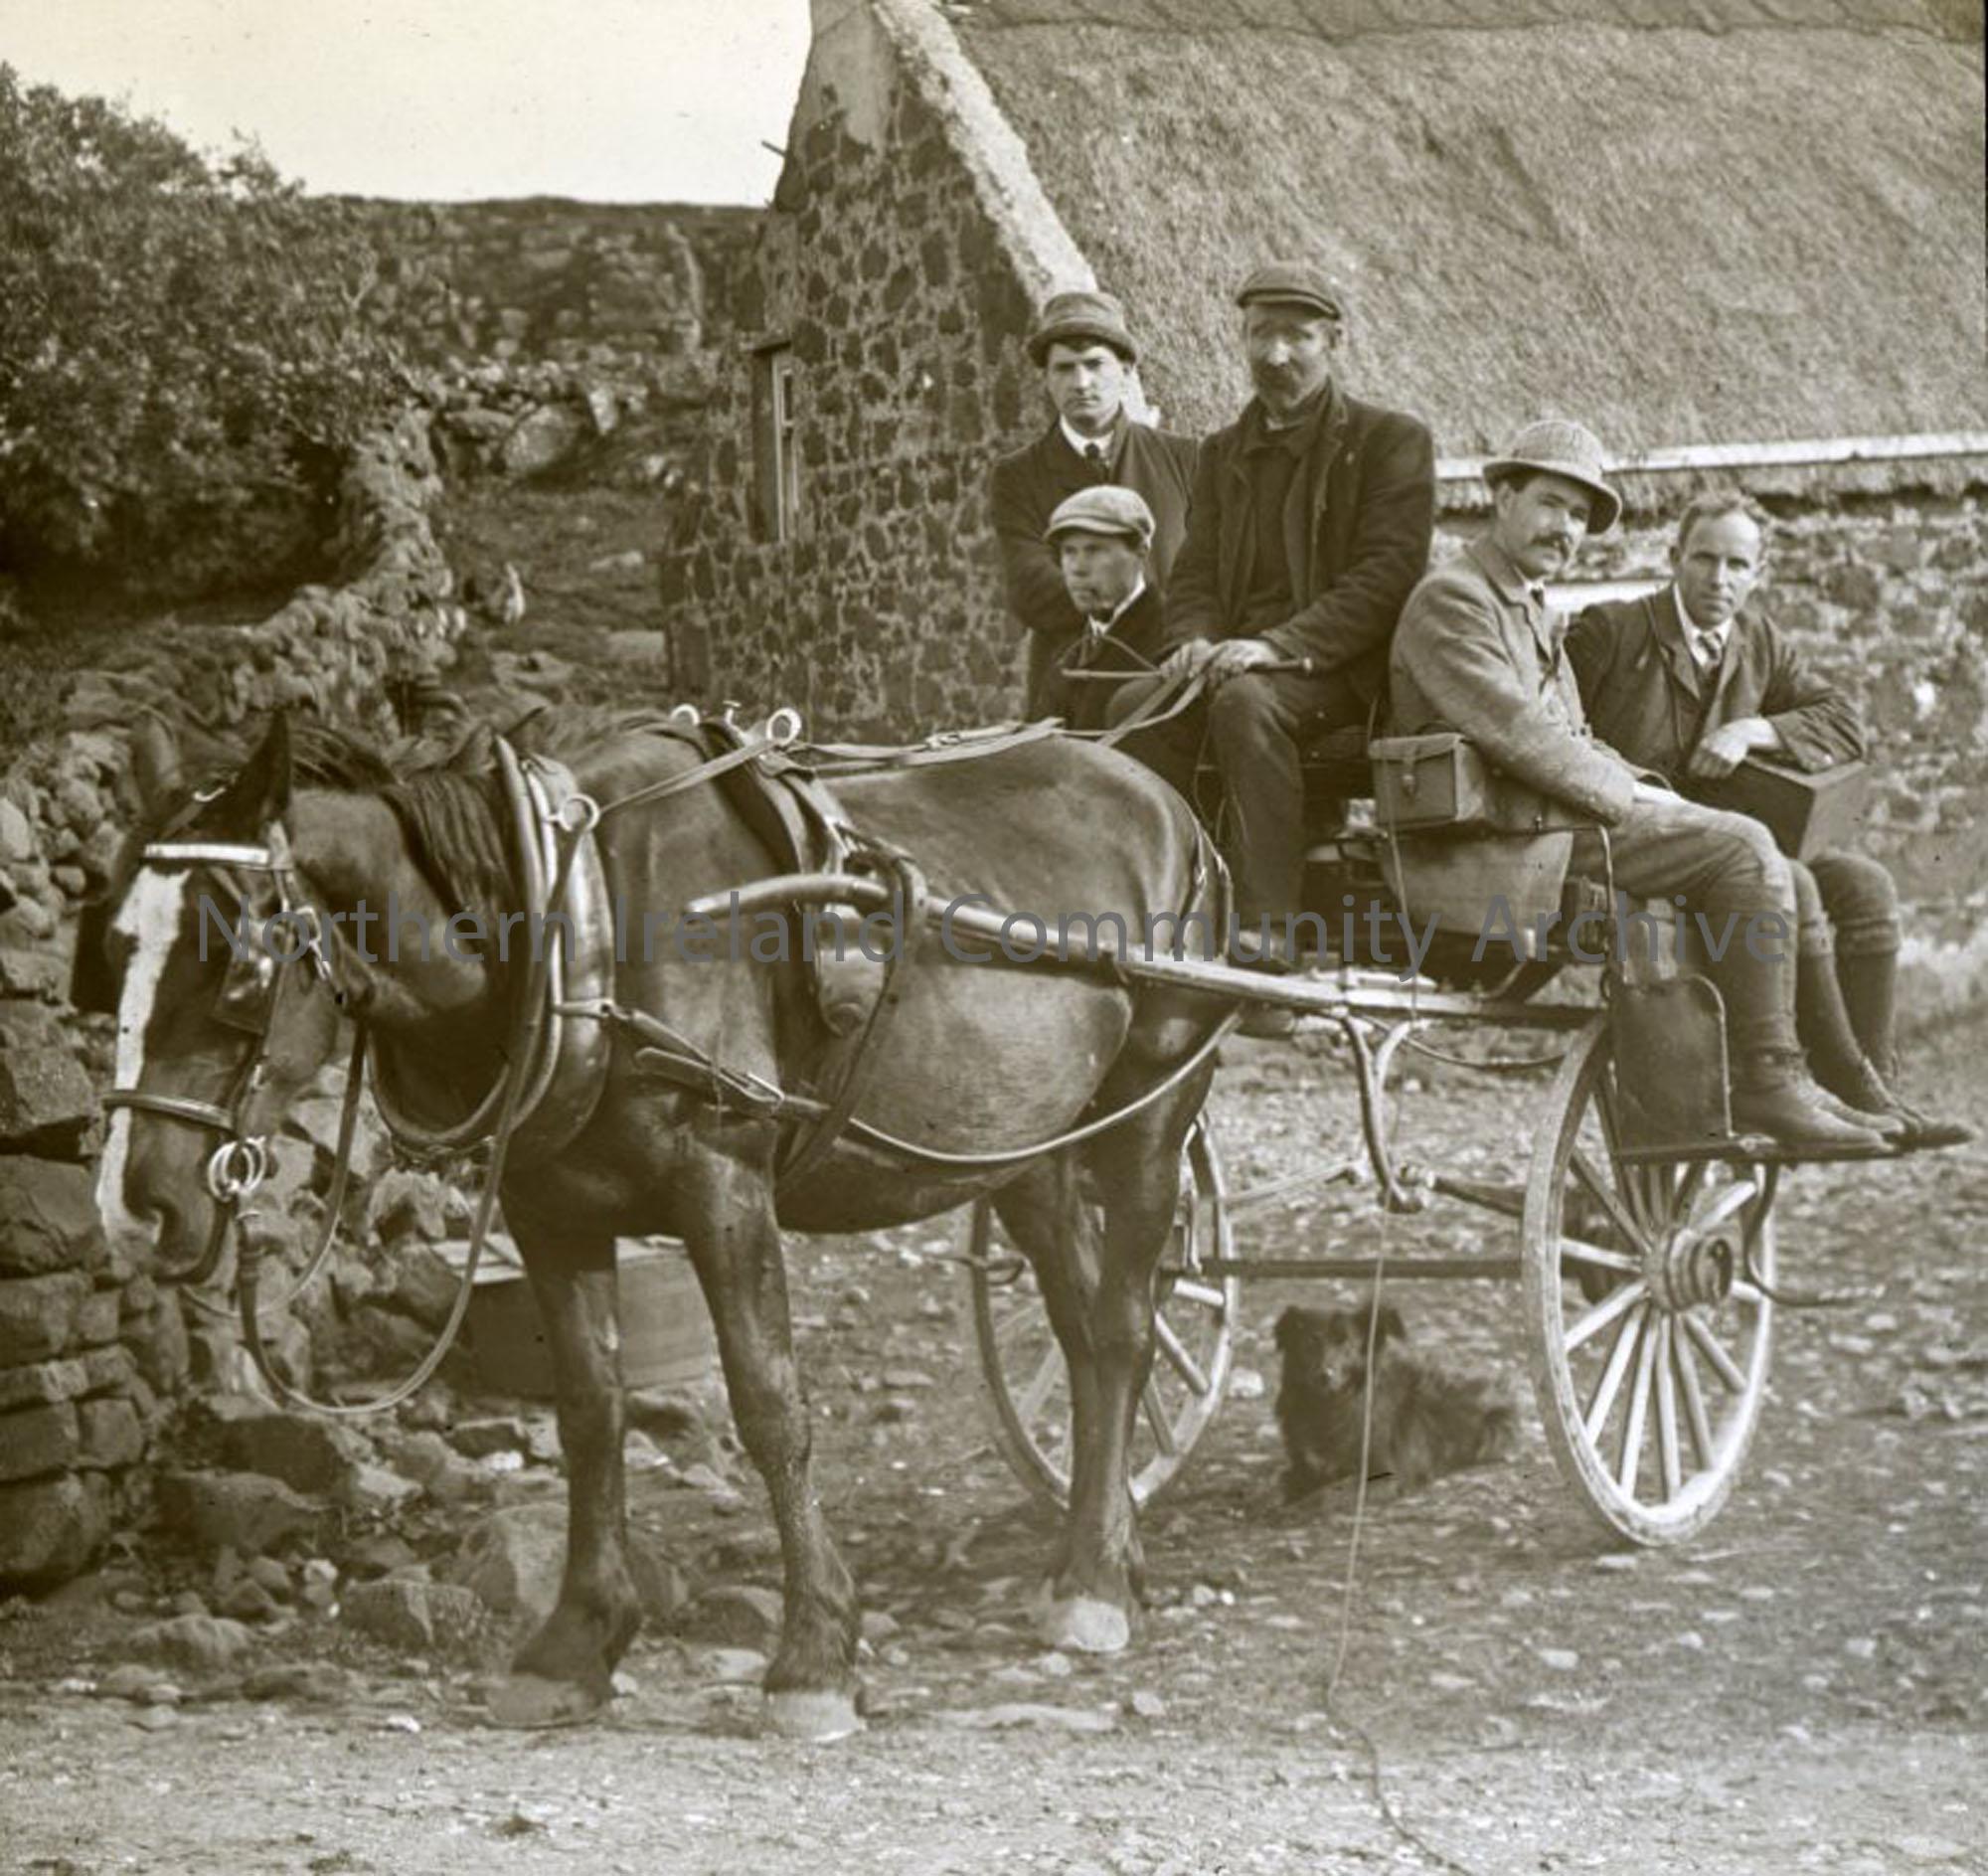 Jaunting car on Rathlin as titled by Sam Henry